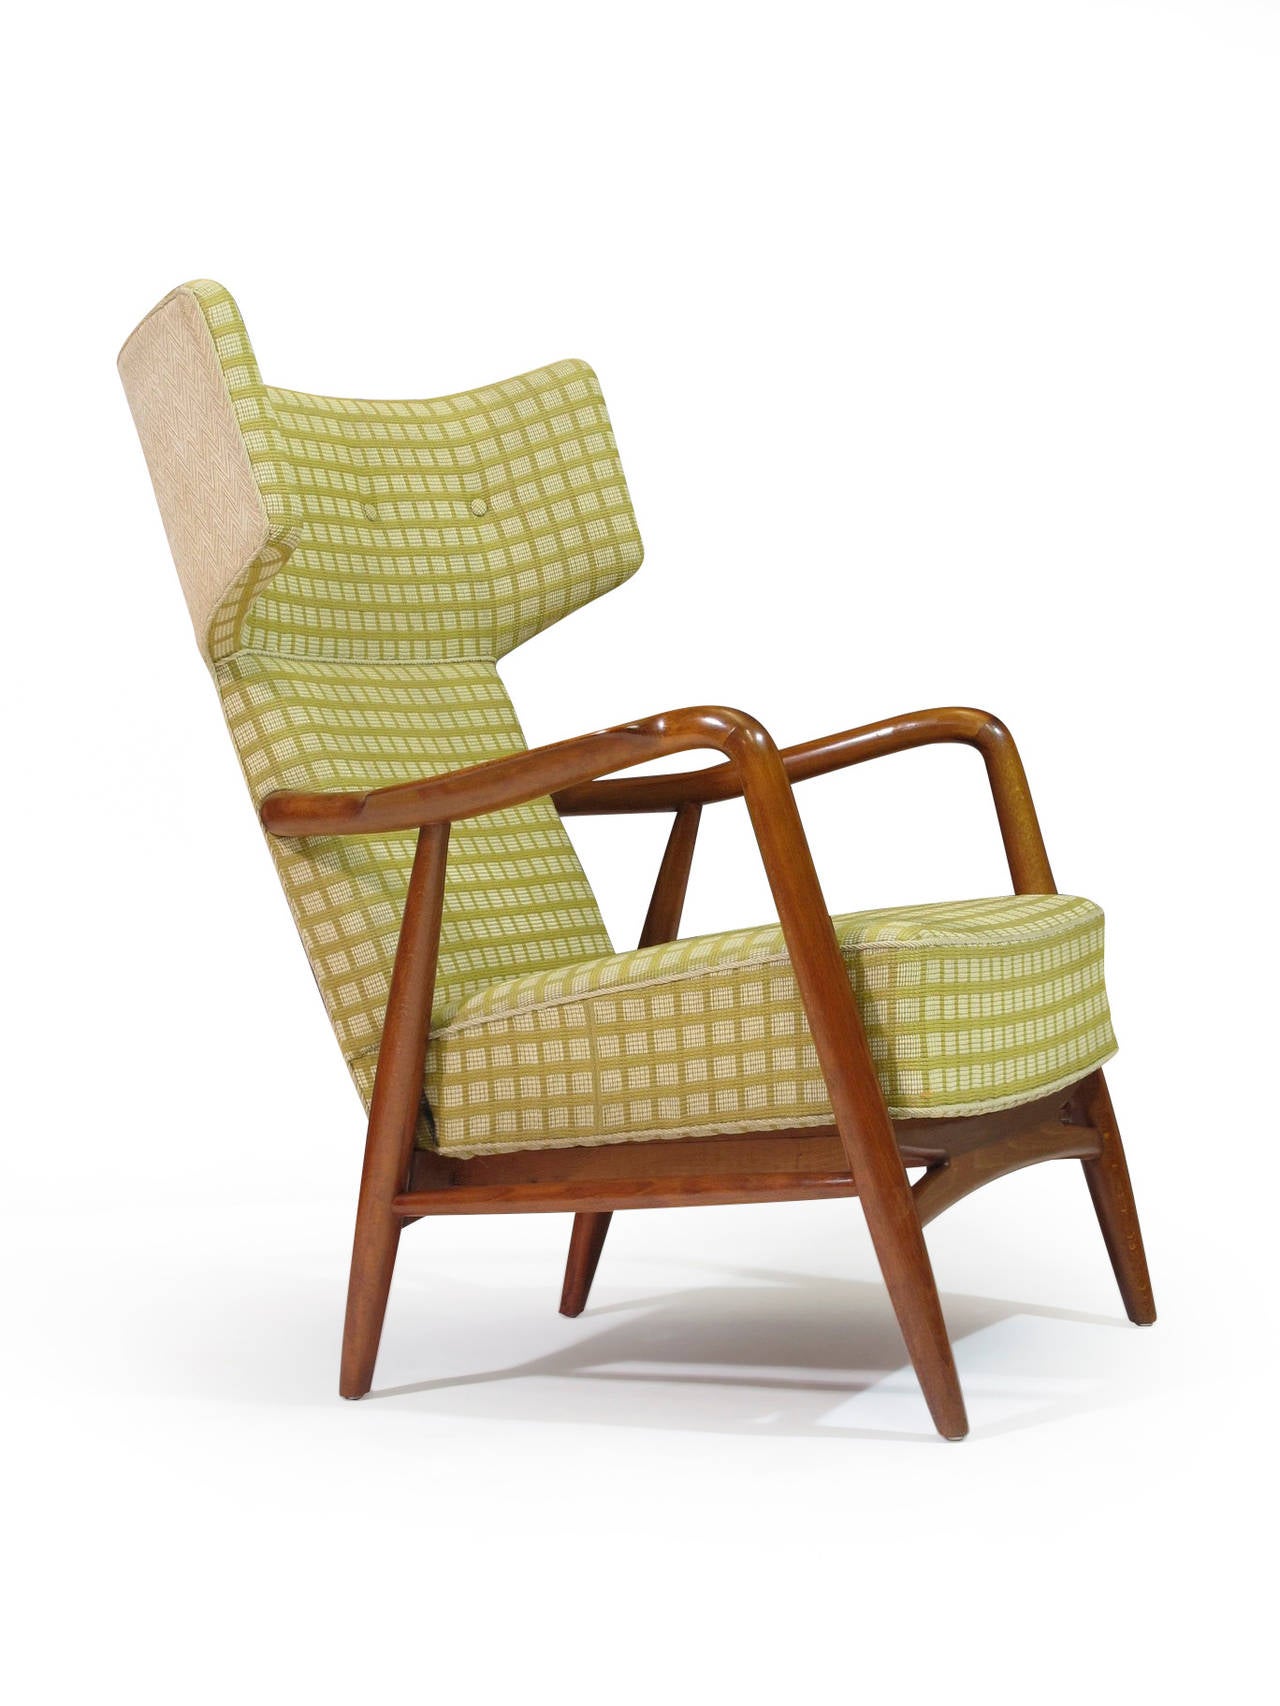 Button tufted Mid-Century highback lounge chair with a sculpted cherry-stained beech frame with open arms, upholstered in the original yellow/green checkered woven textile. Designed in 1947 by architects Nils and Eva Koppel, manufactured by Slagelse